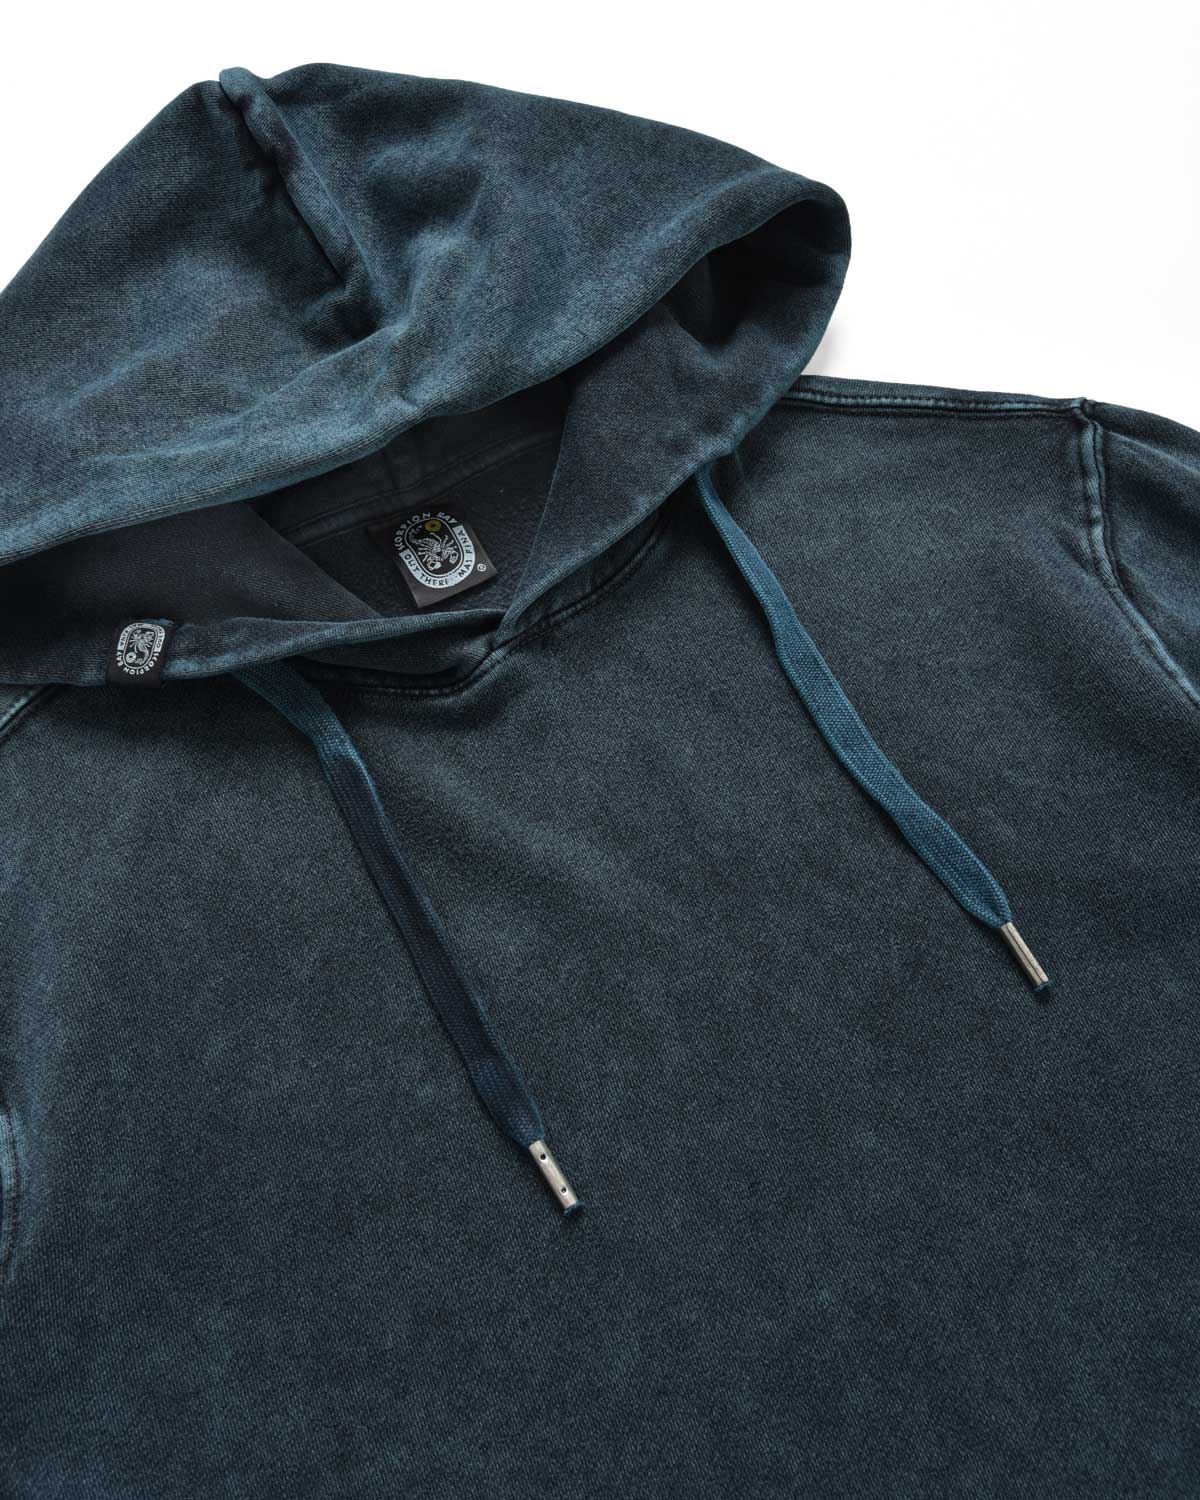 Man | Washed effect petrol colored sweatshirt with hood in 100% cotton